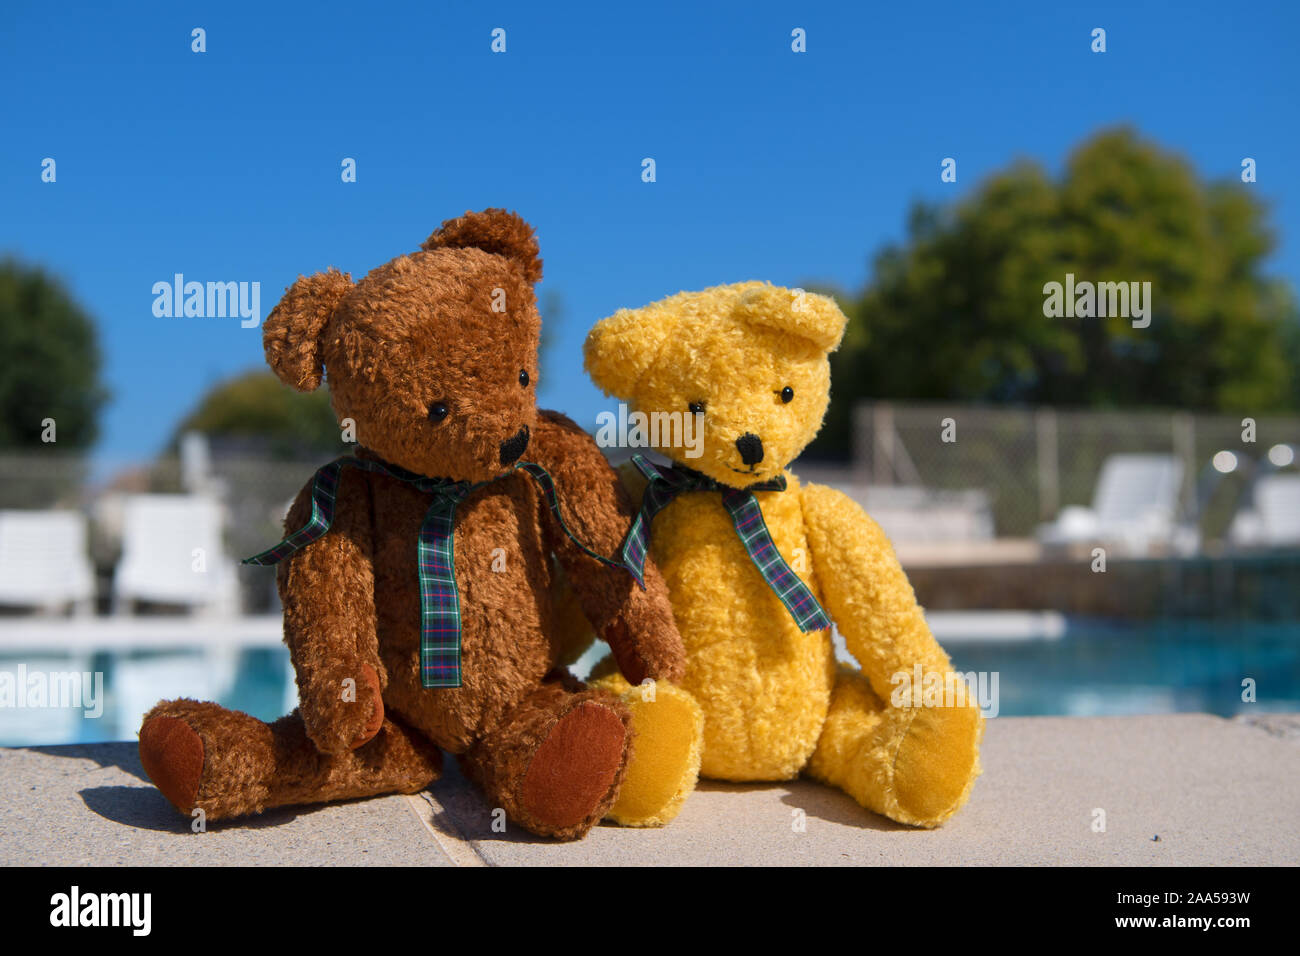 Two bears on vacation near swimming pool Stock Photo